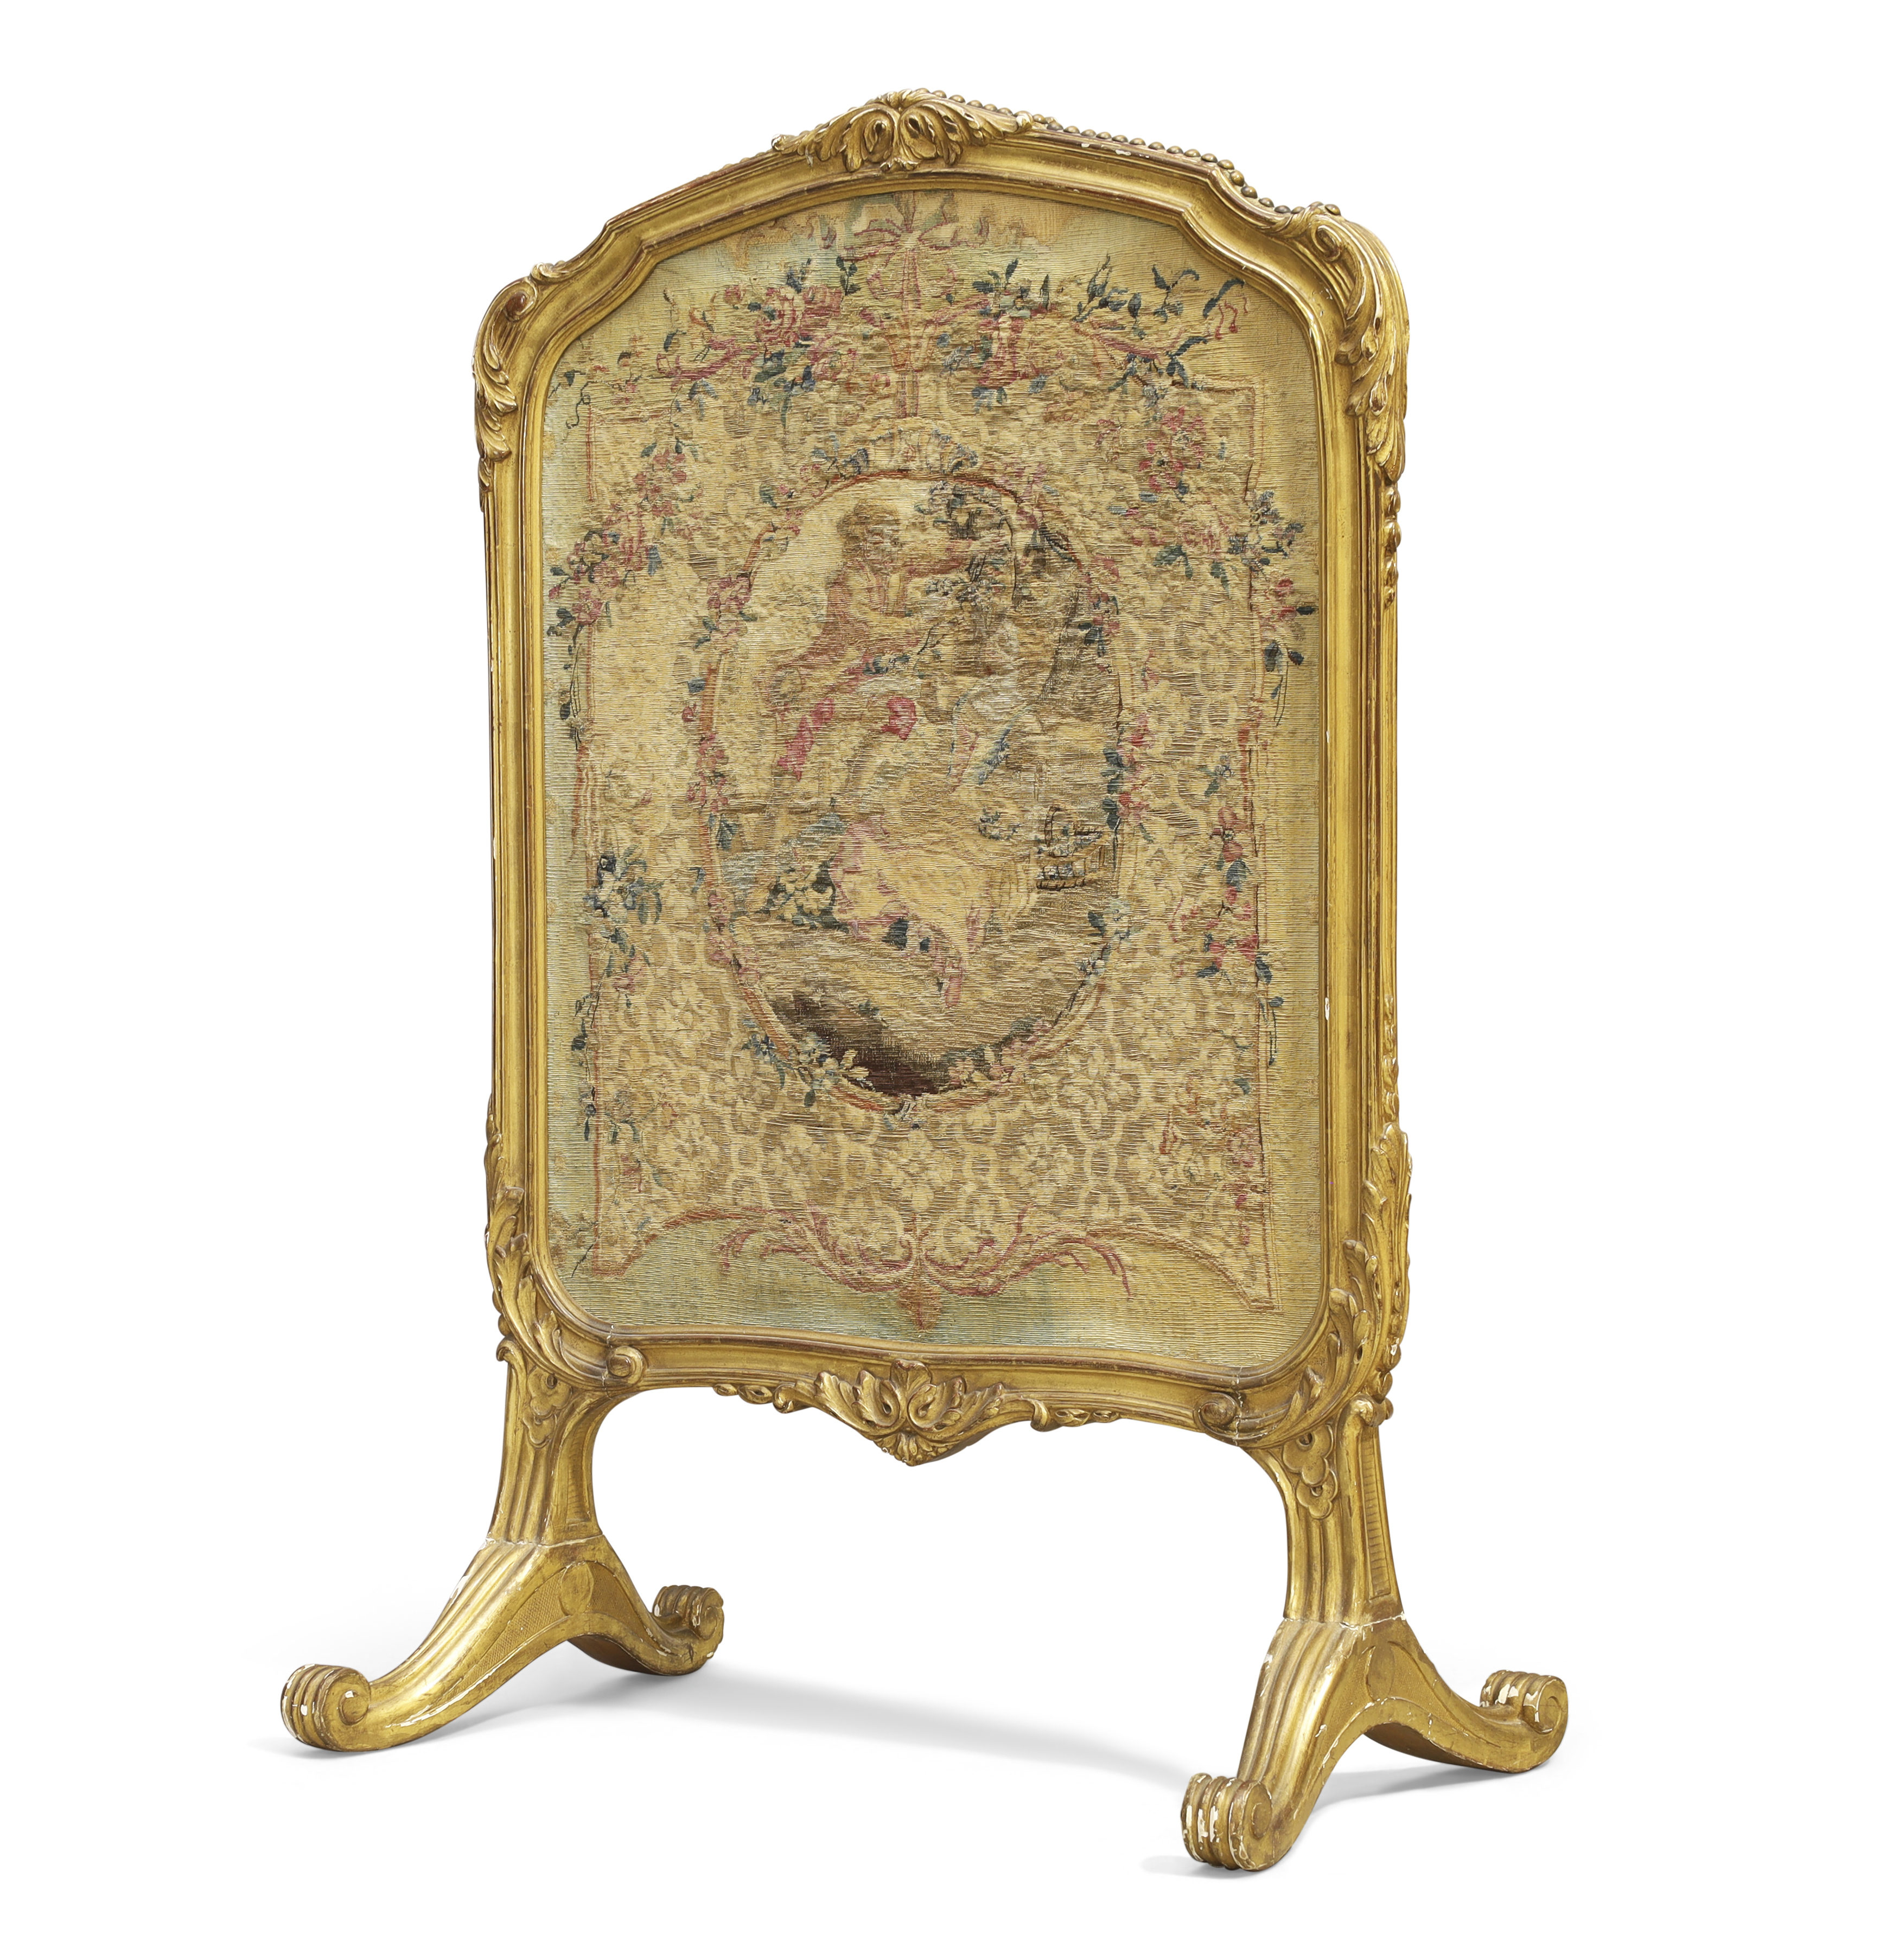 A French giltwood firescreen,  Early 20th century,  Inset with an 18th century Aubusson tapestry ... - Image 2 of 4